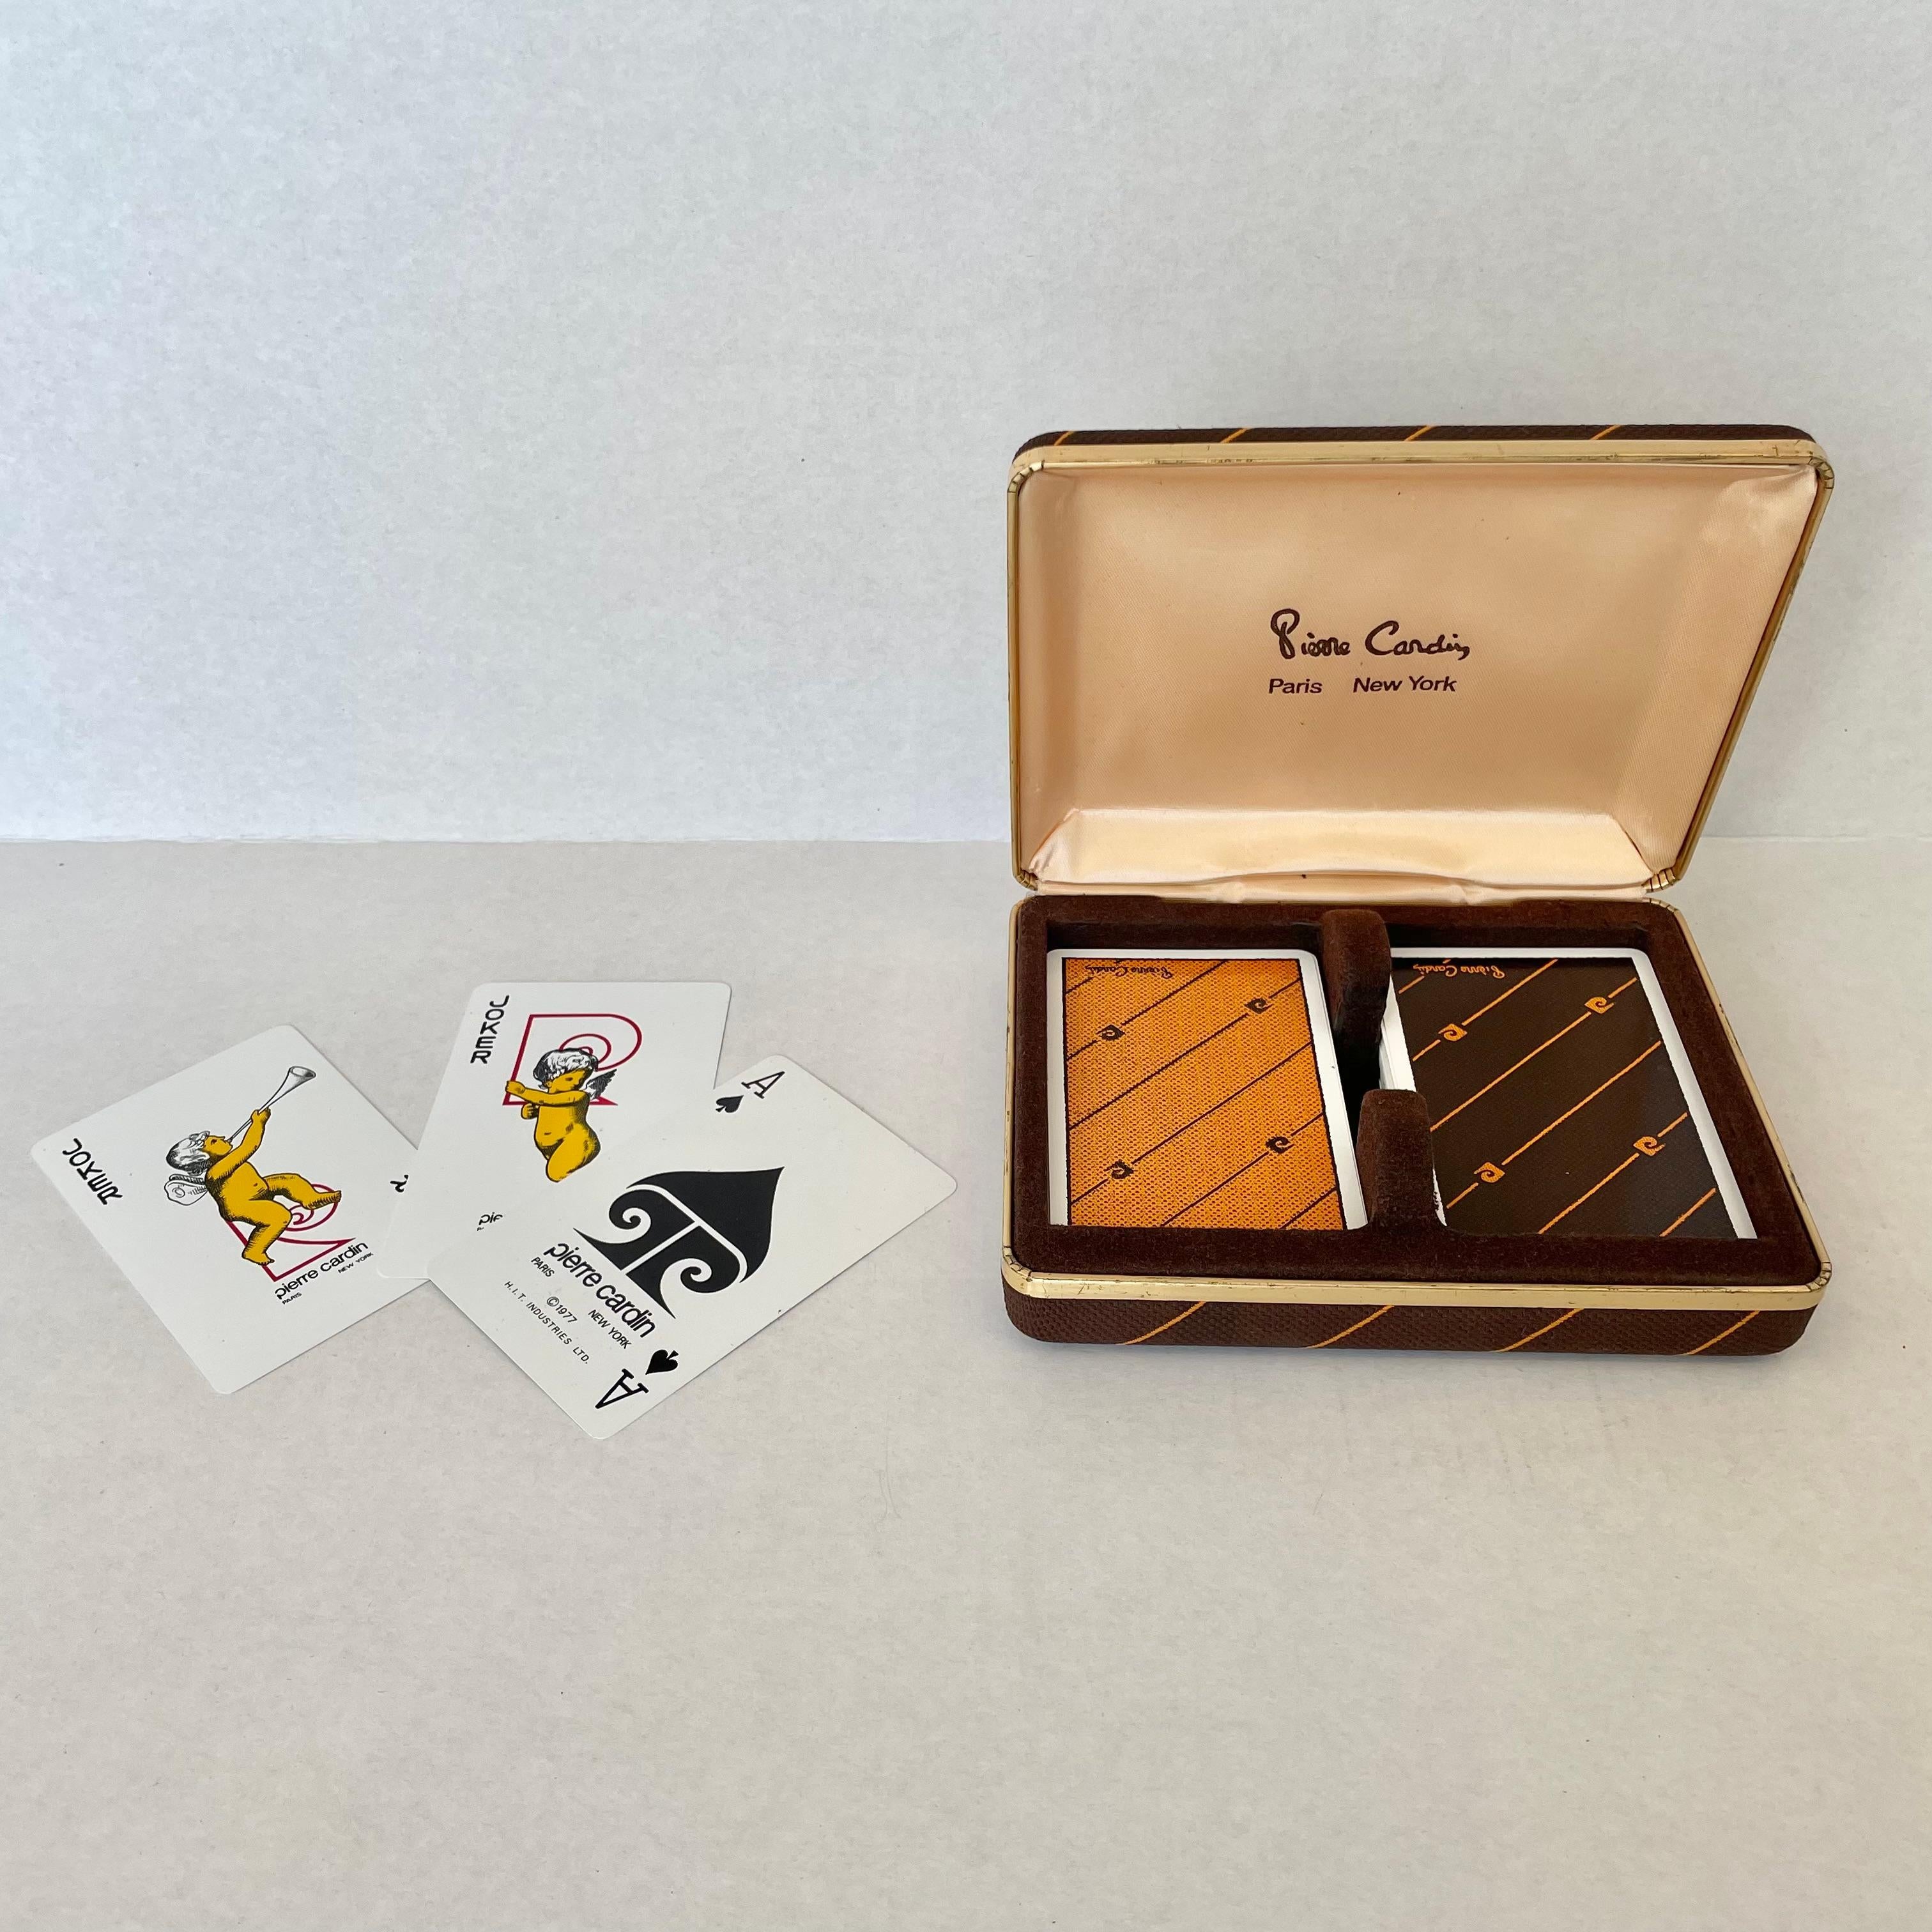 Original 1970s Pierre Cardin plastic playing cards in a fabric case. Elegance and style that is common with the major fashion house and the late Pierre Cardin make these cards a major statement and a piece from the heyday of the House of Cardin.